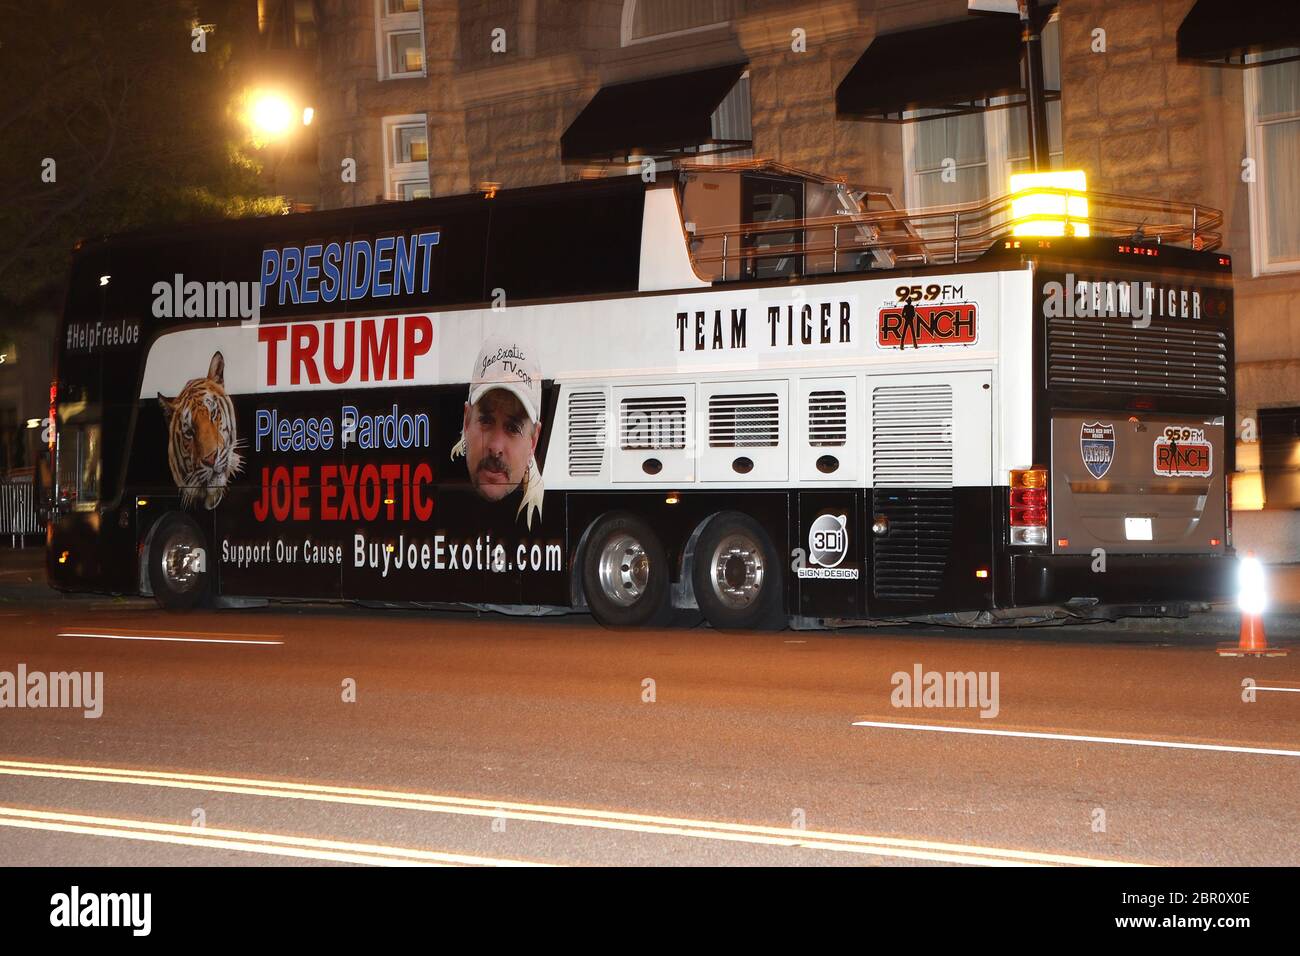 Washington, DC, USA. 19th May, 2020. Joe Exotic's legal team arrives in DC tonight in a bus with his likeness with hopes of getting a chance to see President Trump tomorrow morning and receive a pardon for Exotic. May 19, 2020 in Washington, DC Credit: Mpi34/Media Punch/Alamy Live News Stock Photo